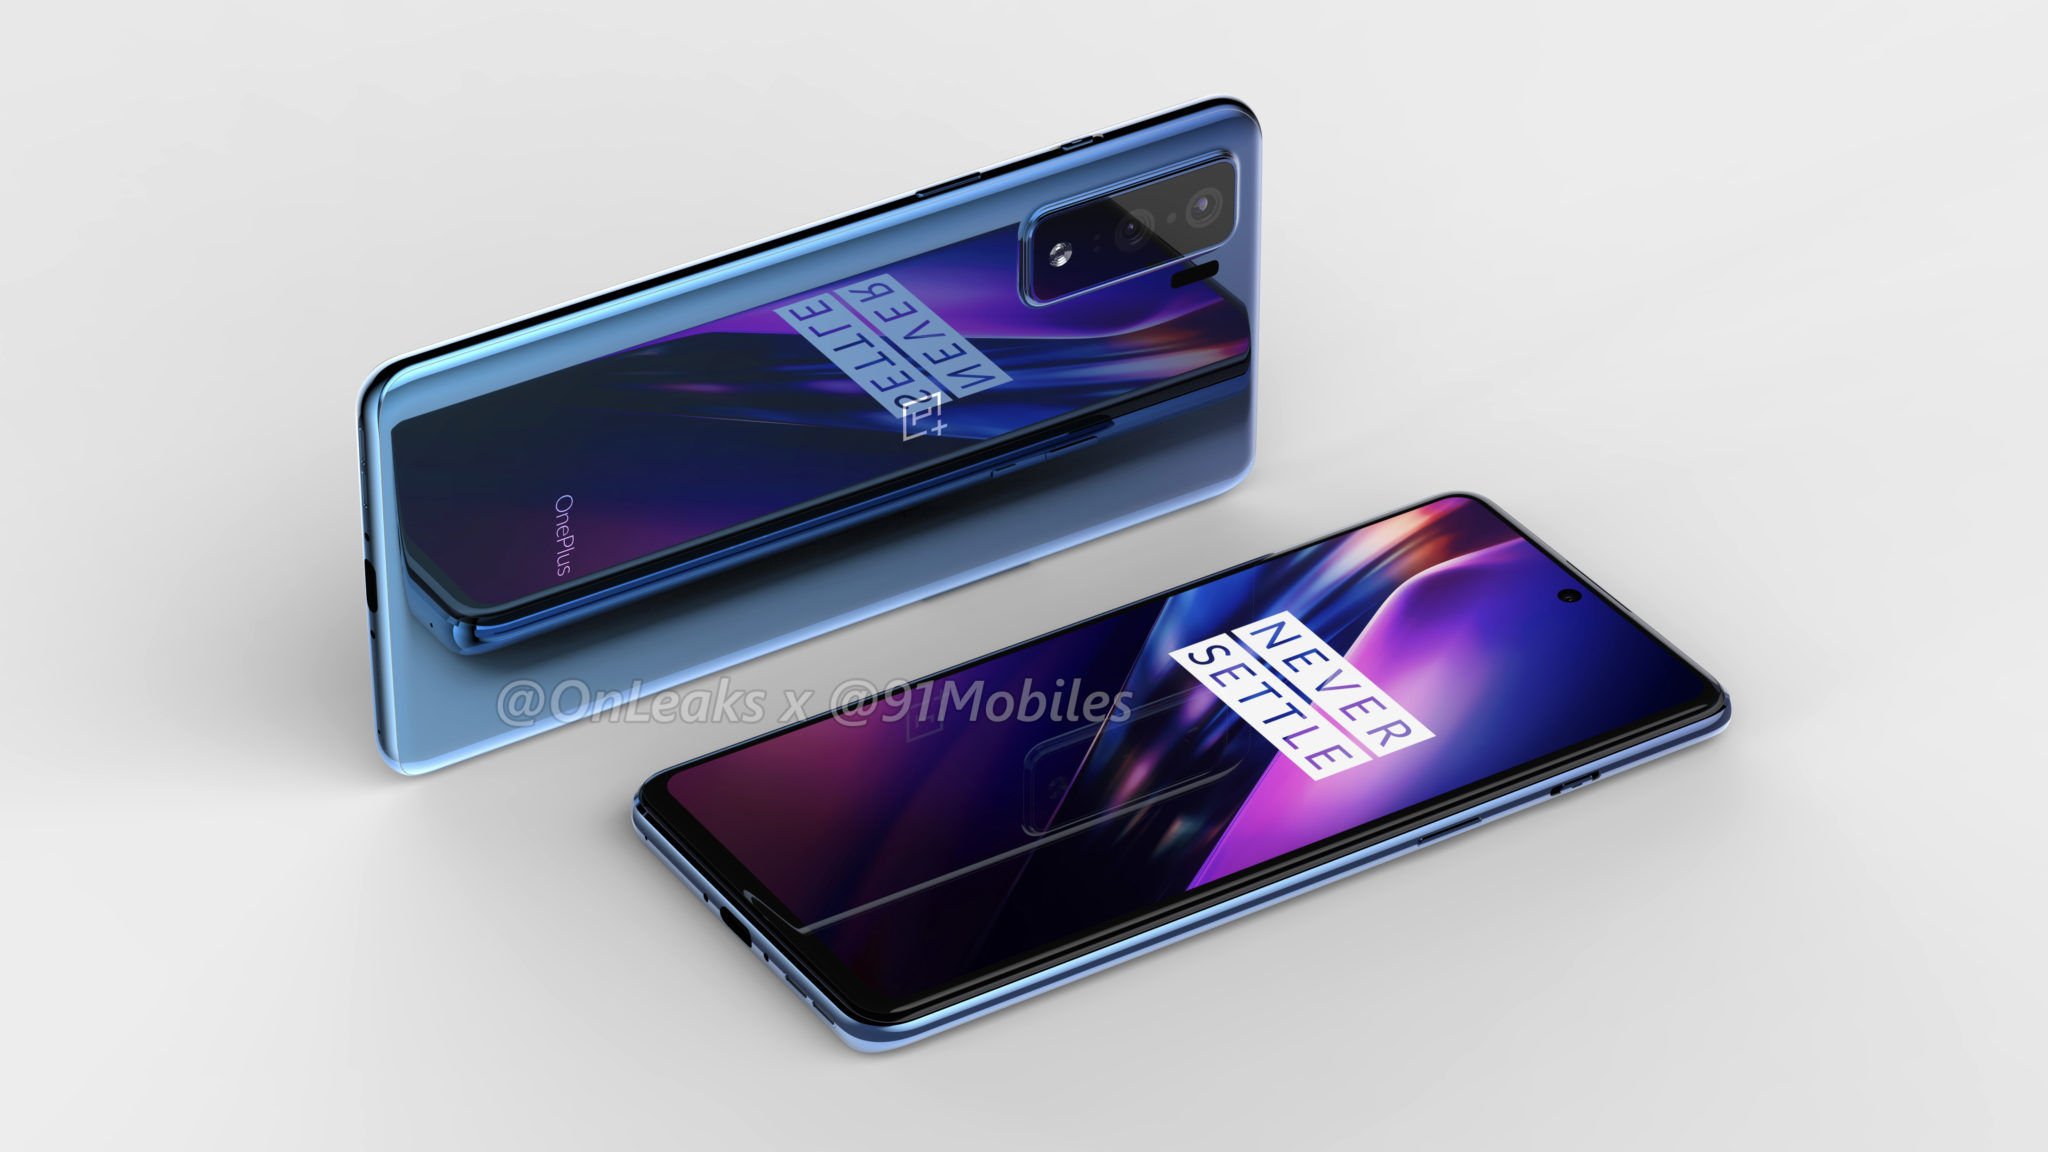 https://www.androidcentral.com/sites/androidcentral.com/files/styles/thumbnail/public/article_images/2019/12/oneplus-8-lite-render-3.jpg?itok=IHXPrMka